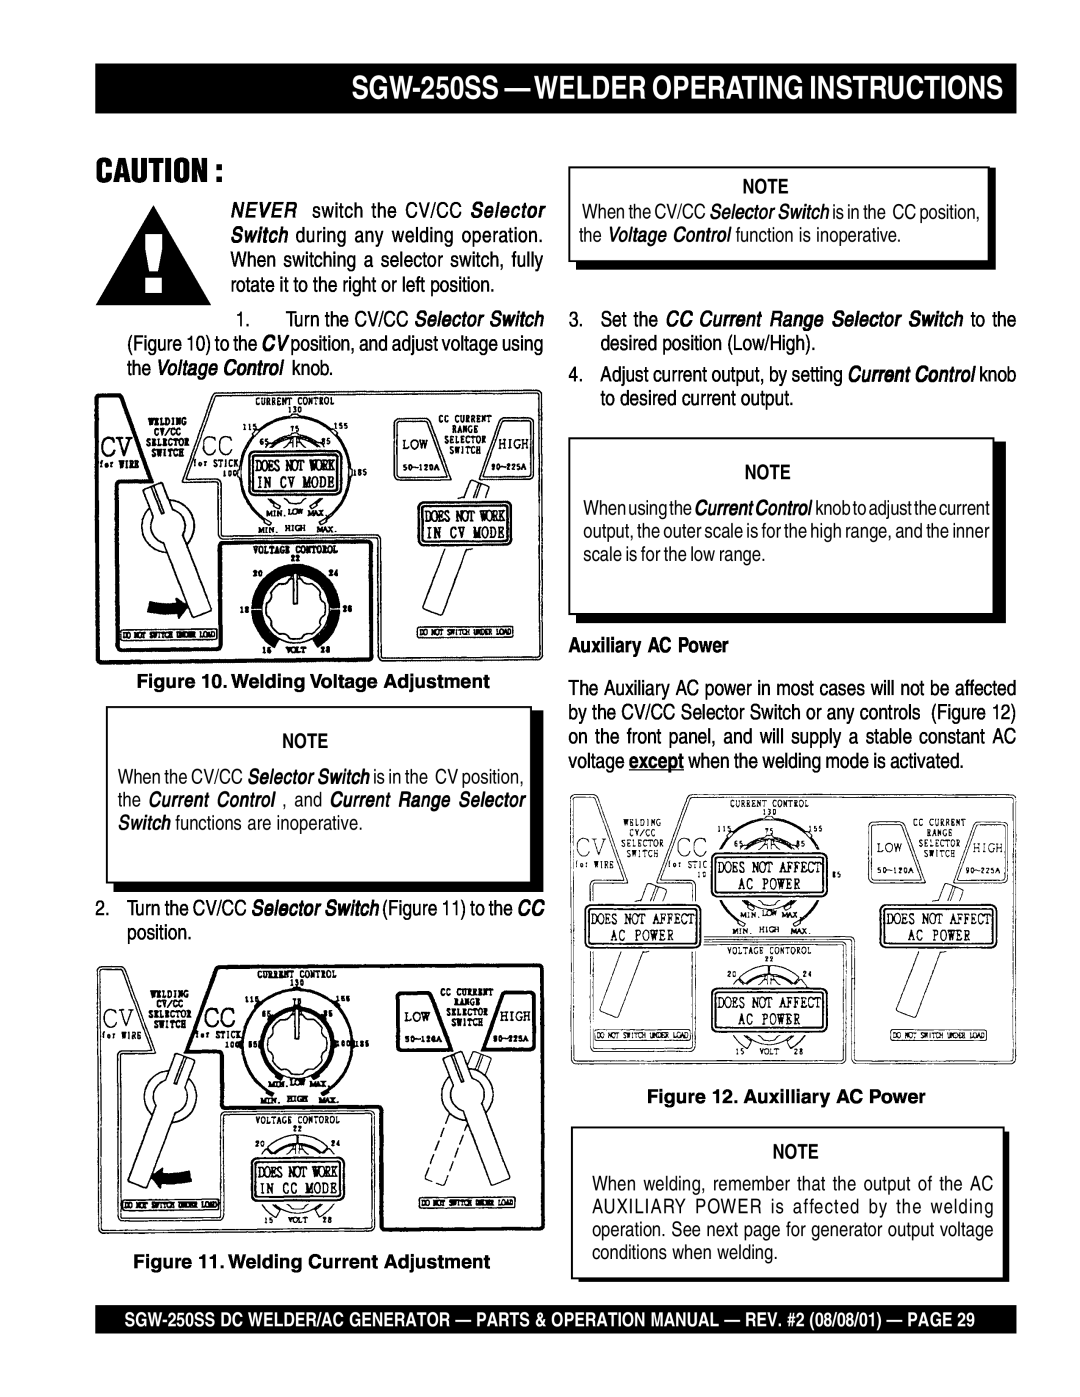 Multiquip operation manual SGW-250SS -WELDEROPERATING INSTRUCTIONS, Auxiliary AC Power 